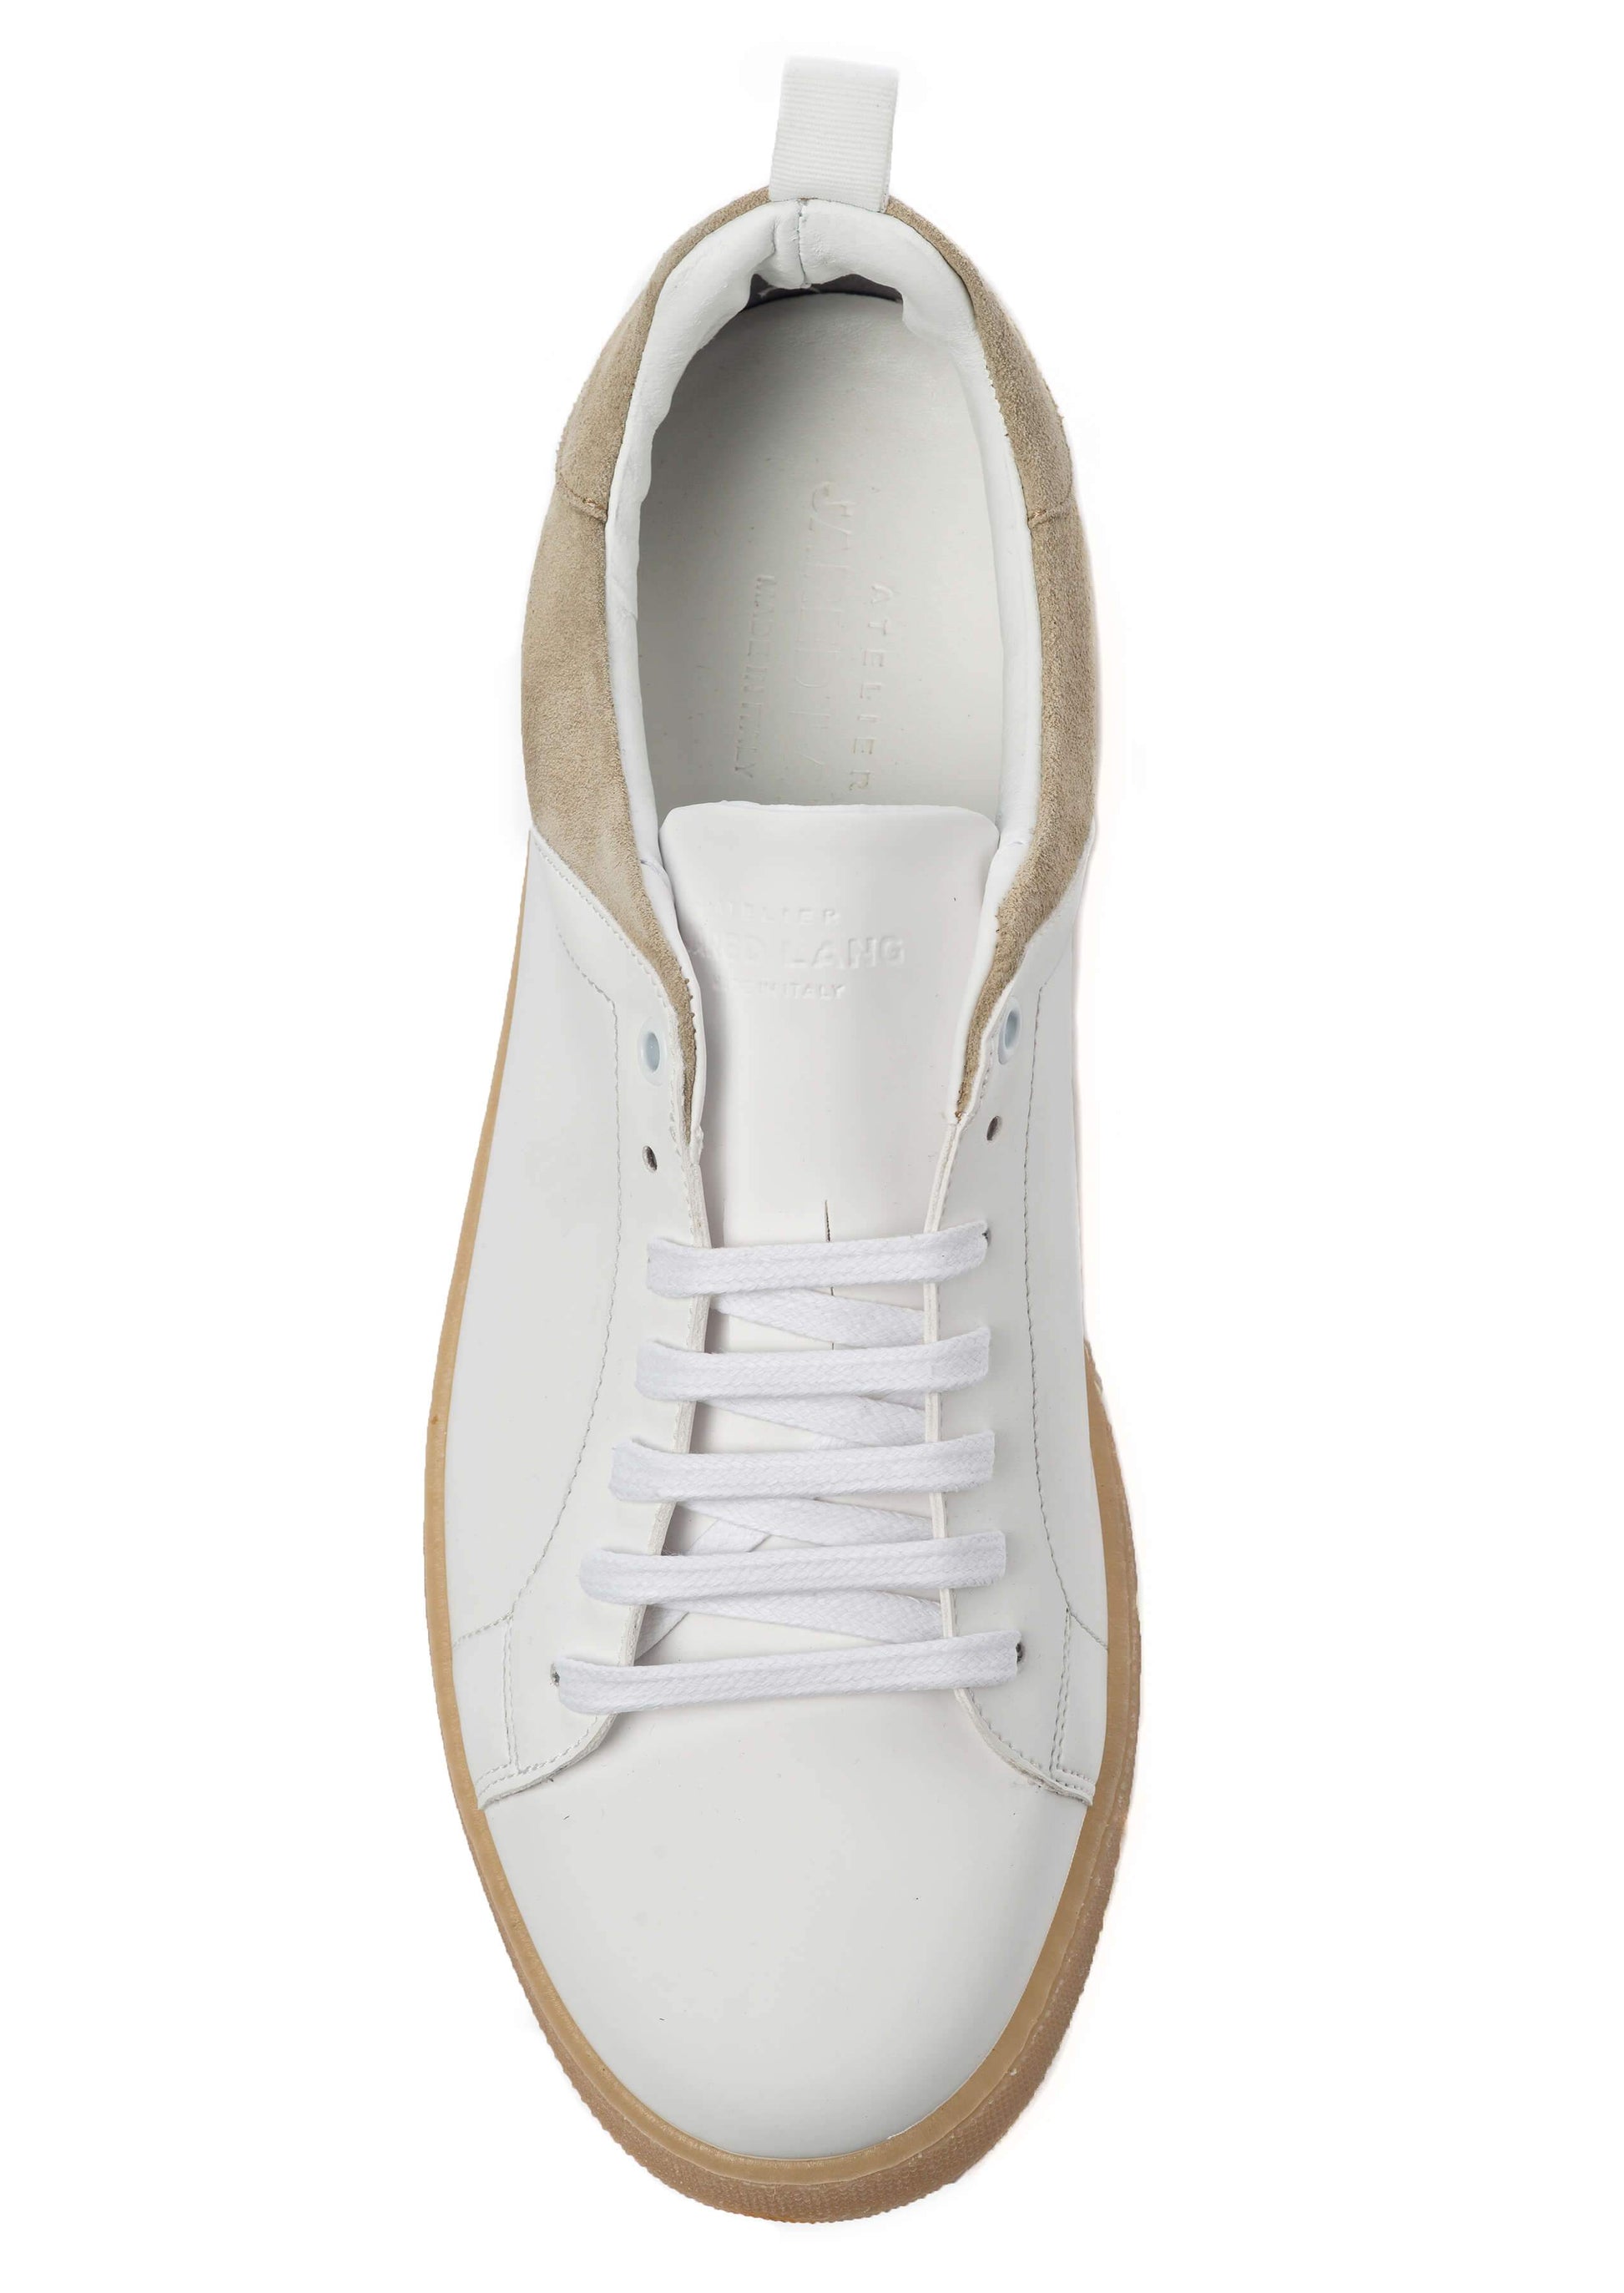 White Beige Sneakers for Men 3839-WB - Jared Lang